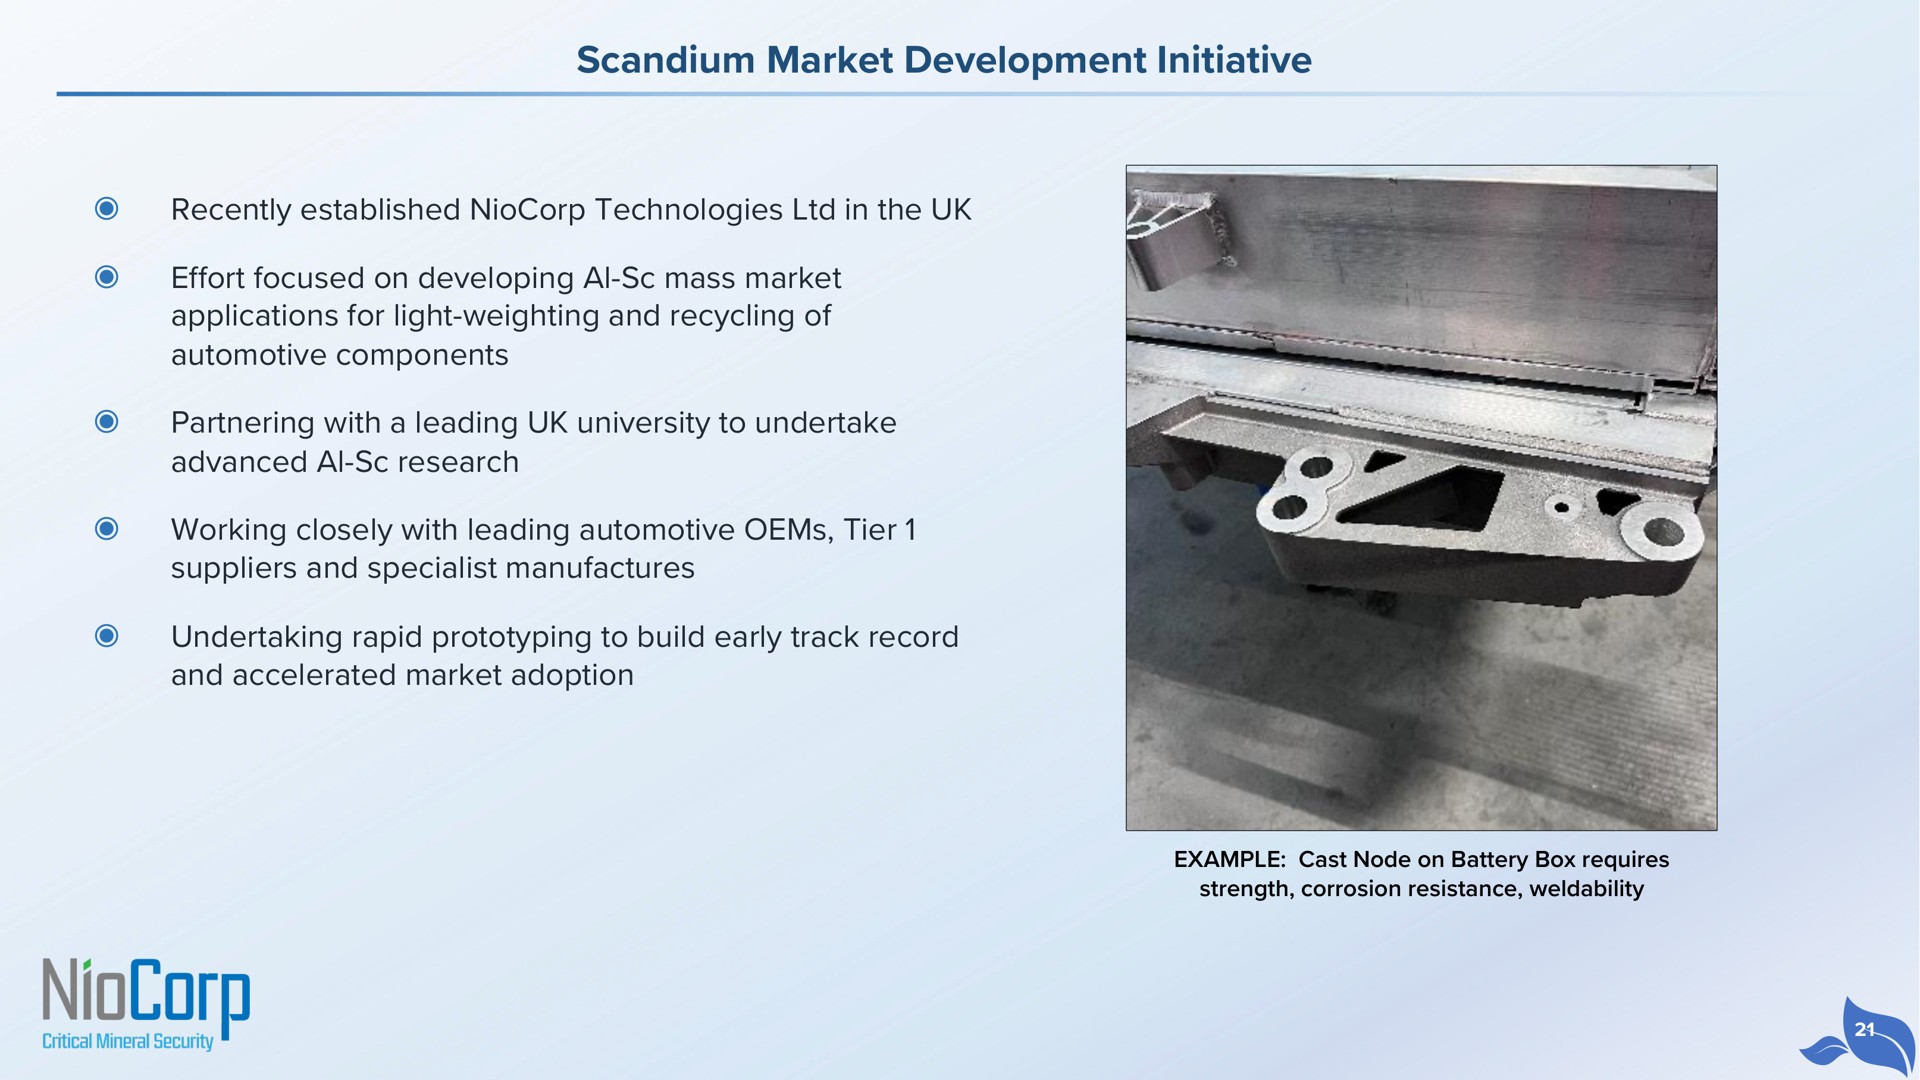 scandium market development initiative recently established technologies in the effort focused on developing mass market applications for light weighting and recycling of automotive components partnering with a leading university to undertake advanced research working closely with leading automotive tier suppliers and specialist manufactures undertaking rapid to build early track record and accelerated market adoption | NioCorp